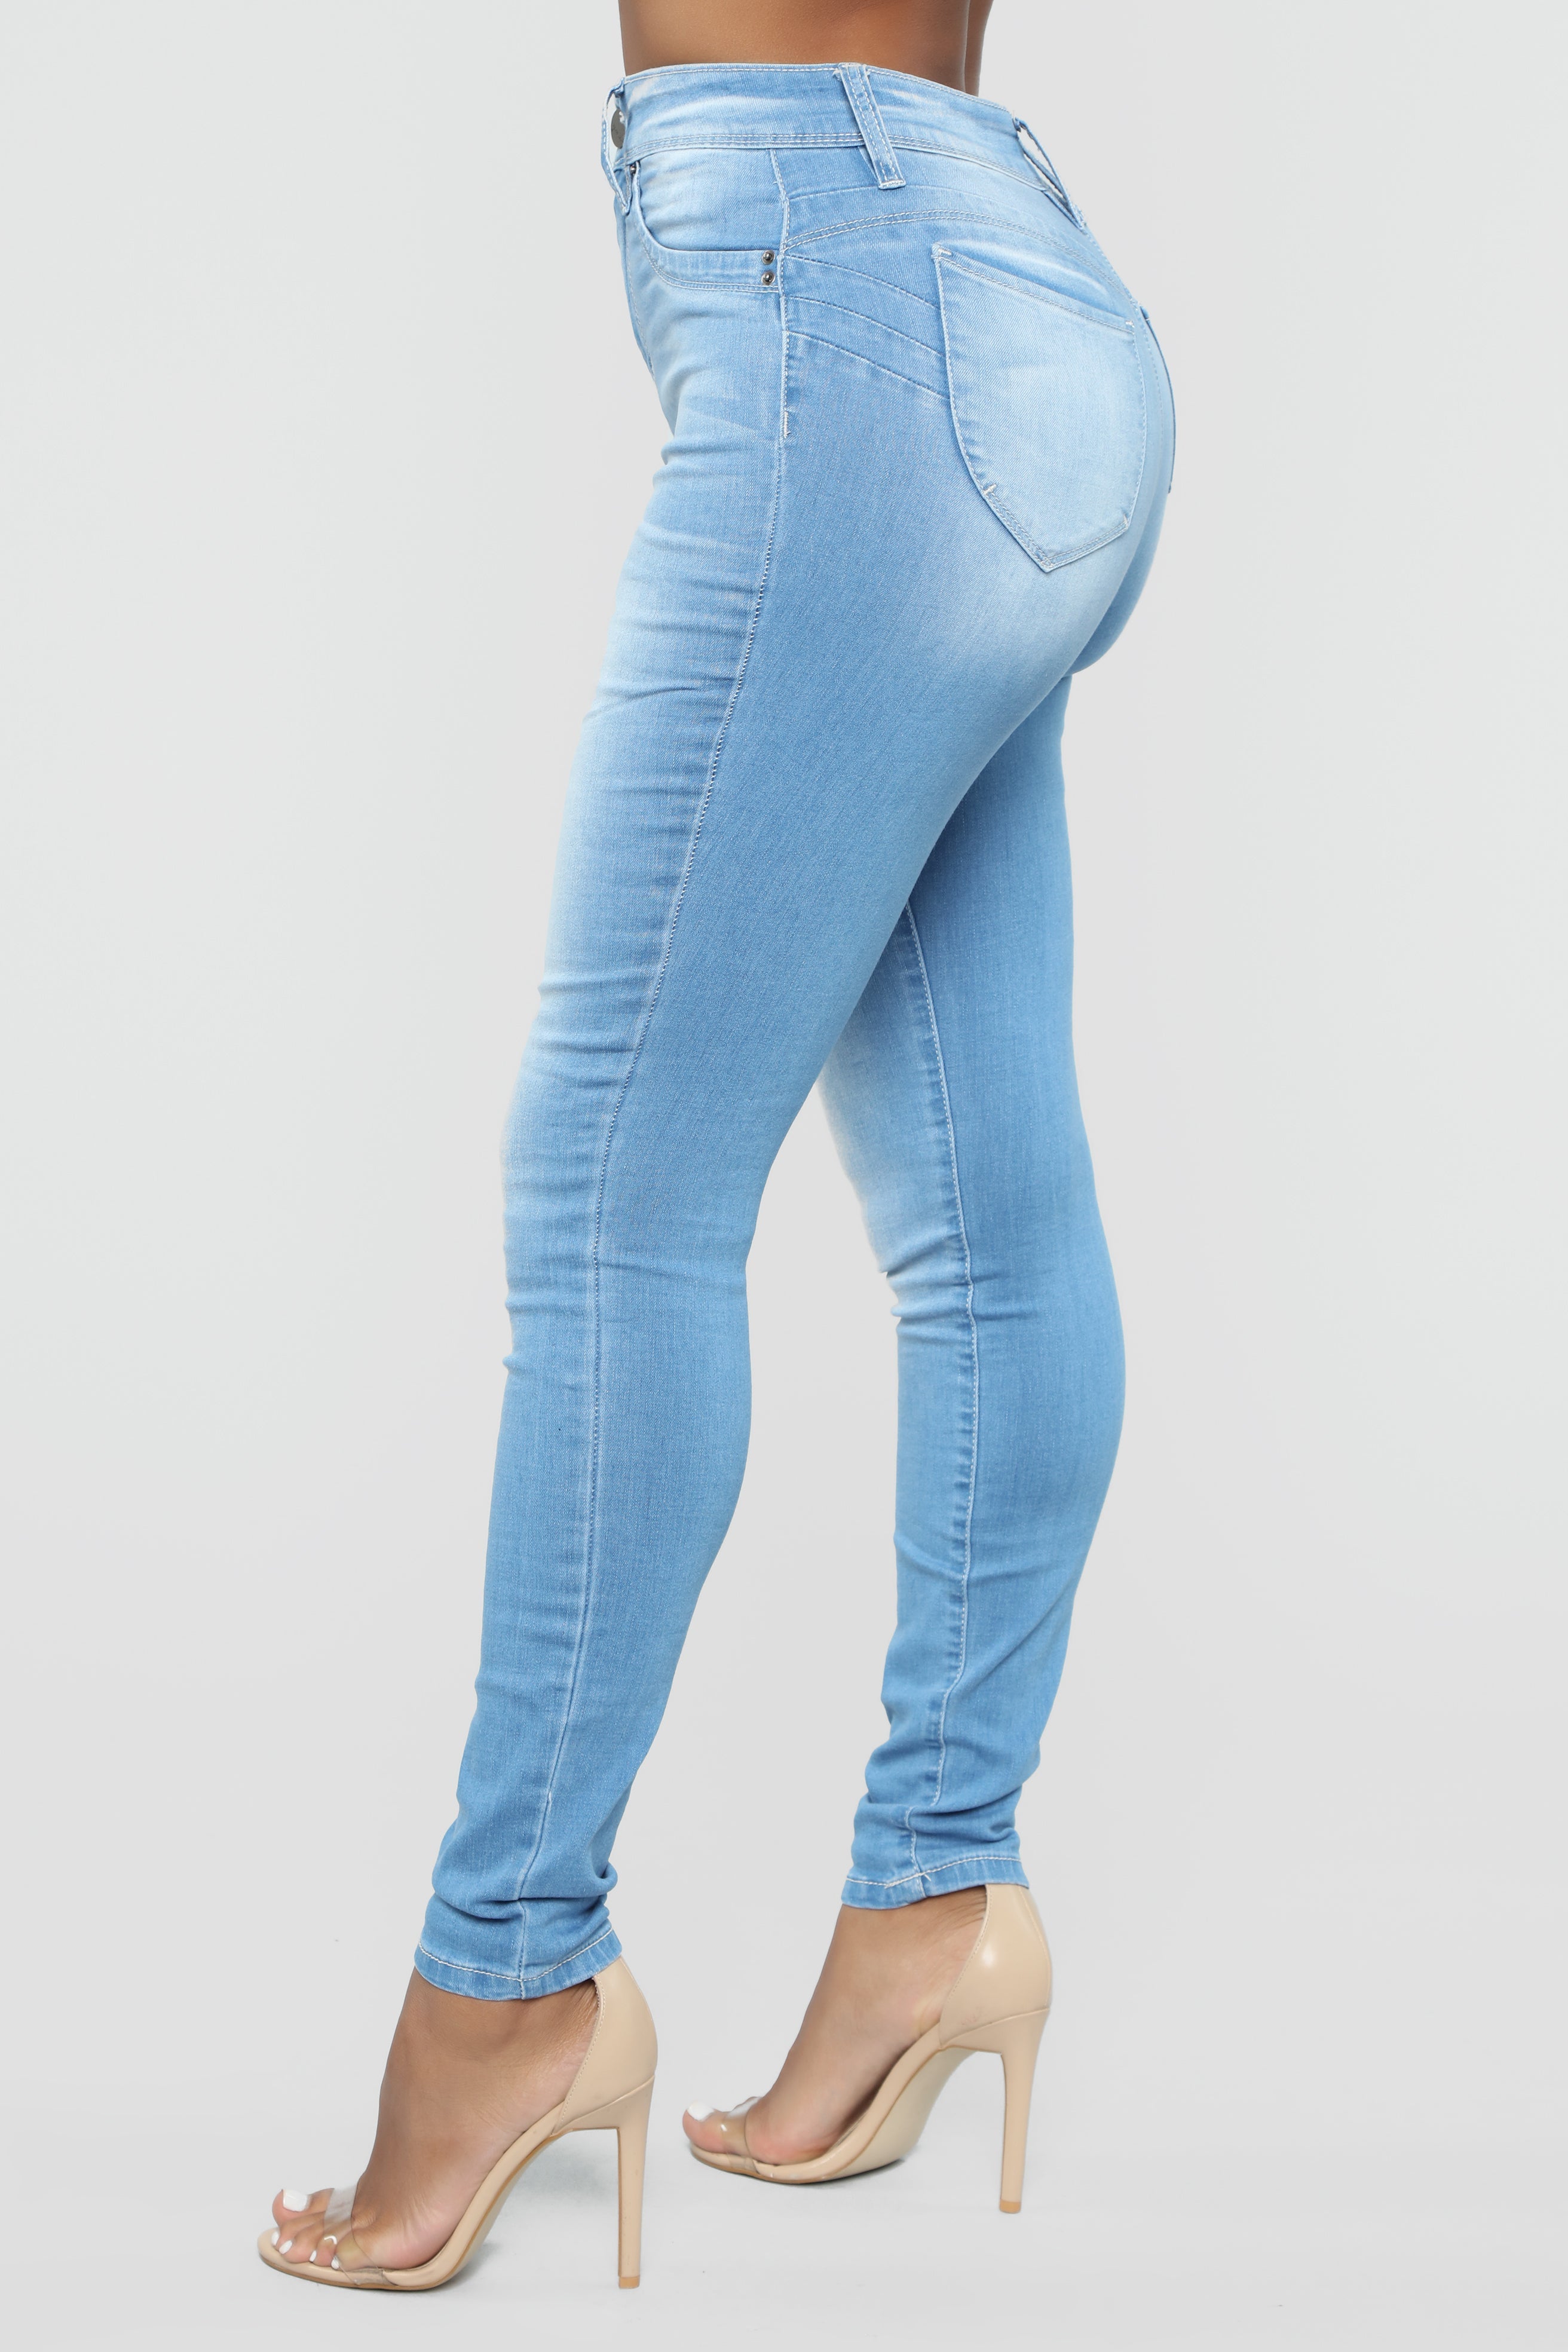 Statuesque Booty Lifting Jeans - Light Blue Wash – InsStreet